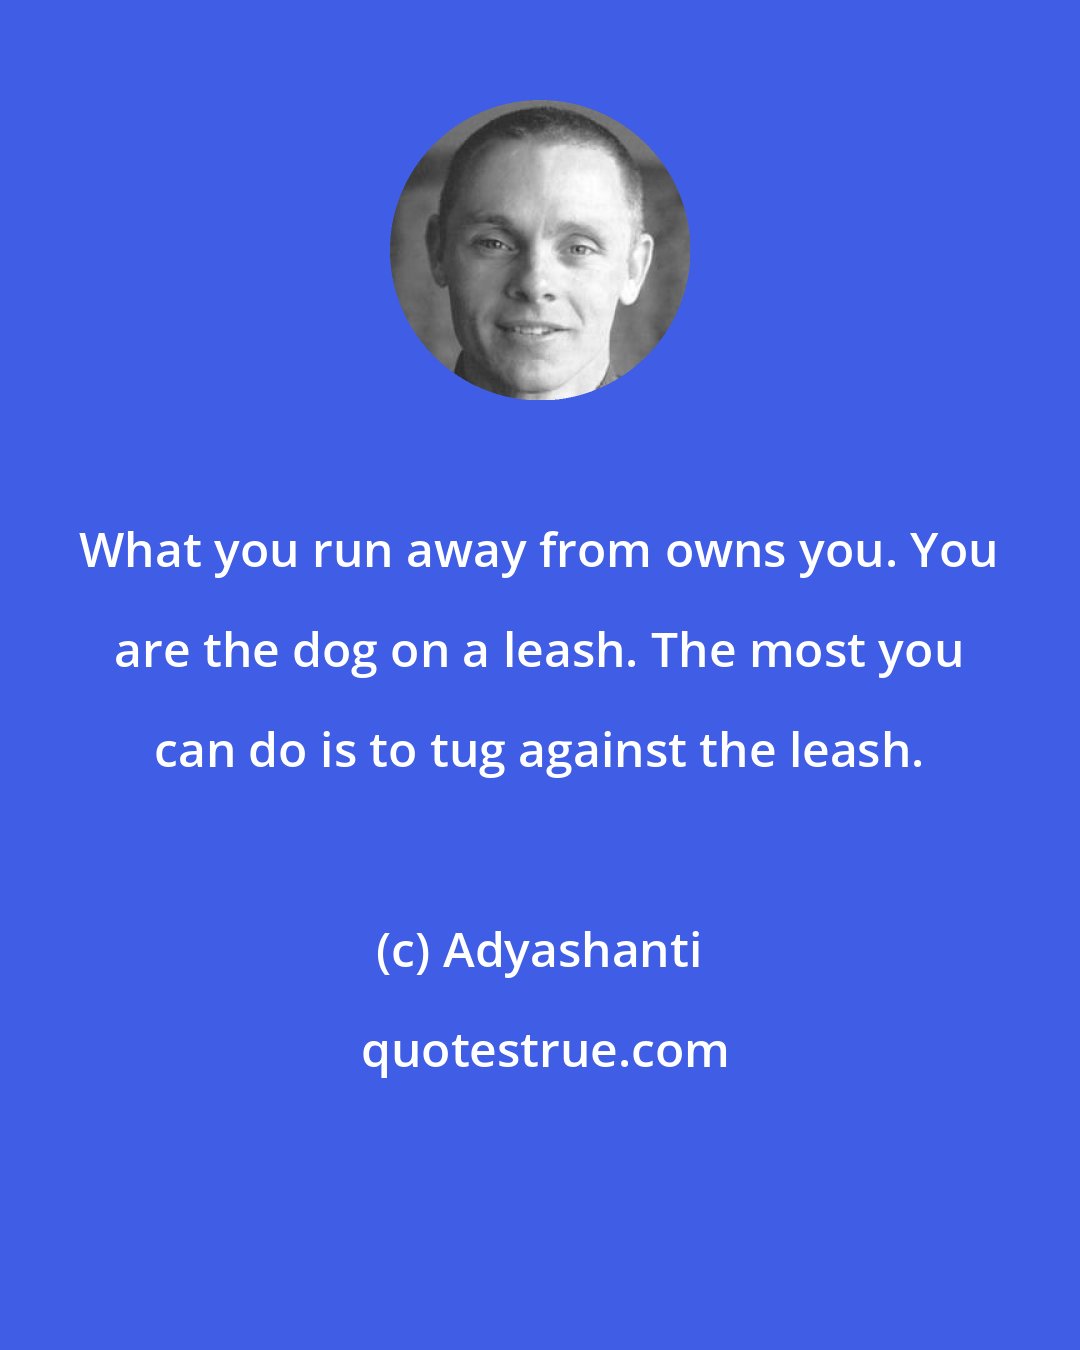 Adyashanti: What you run away from owns you. You are the dog on a leash. The most you can do is to tug against the leash.